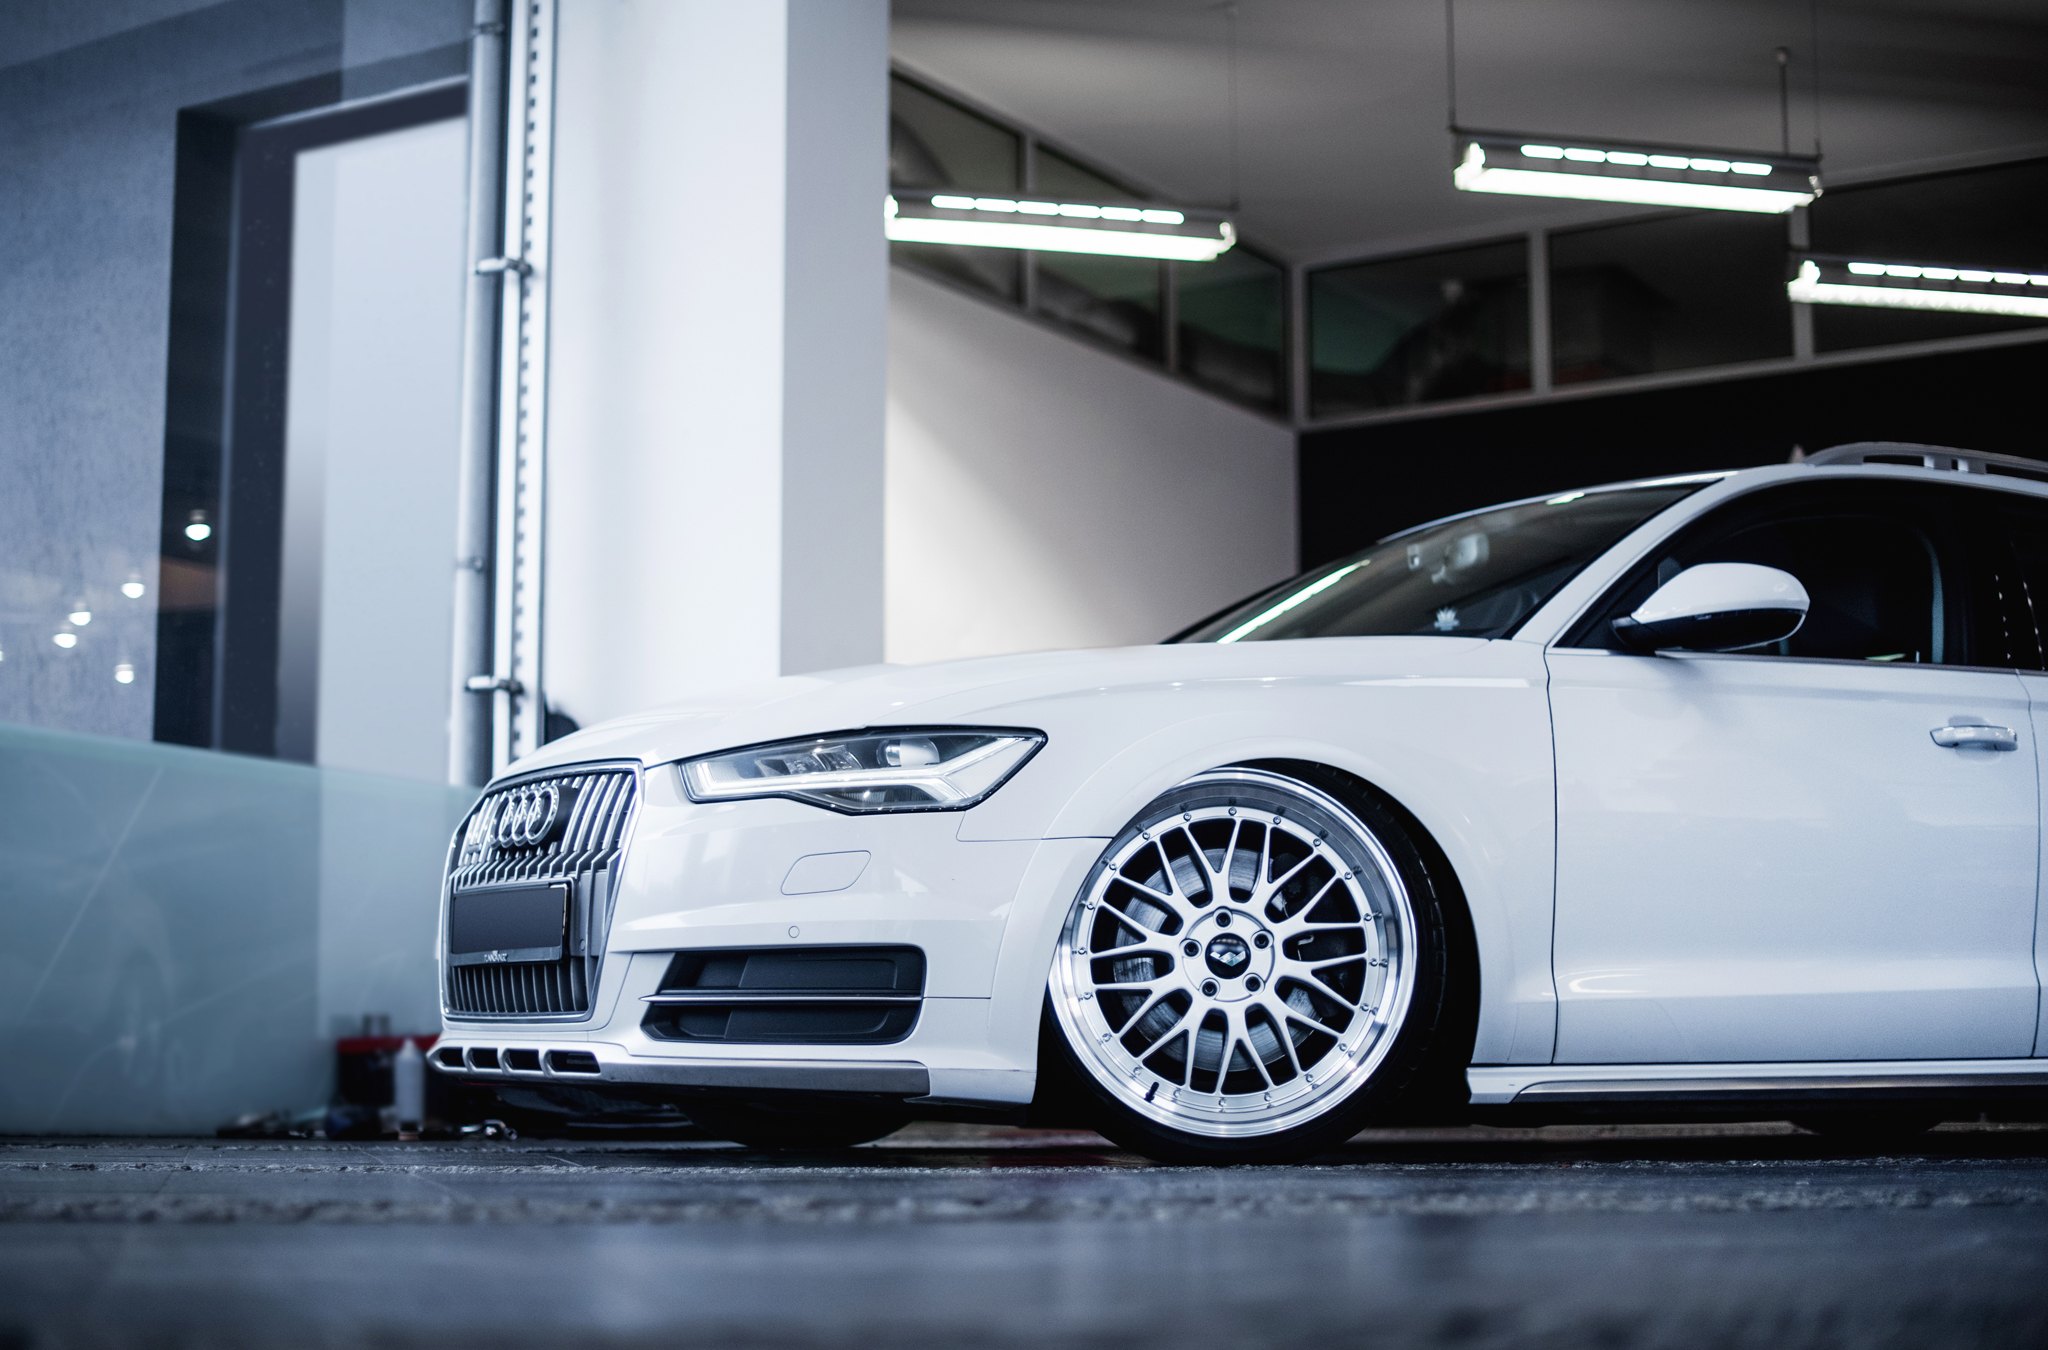 Aftermarket Front Bumper on White Audi A6 - Photo by JR Wheels